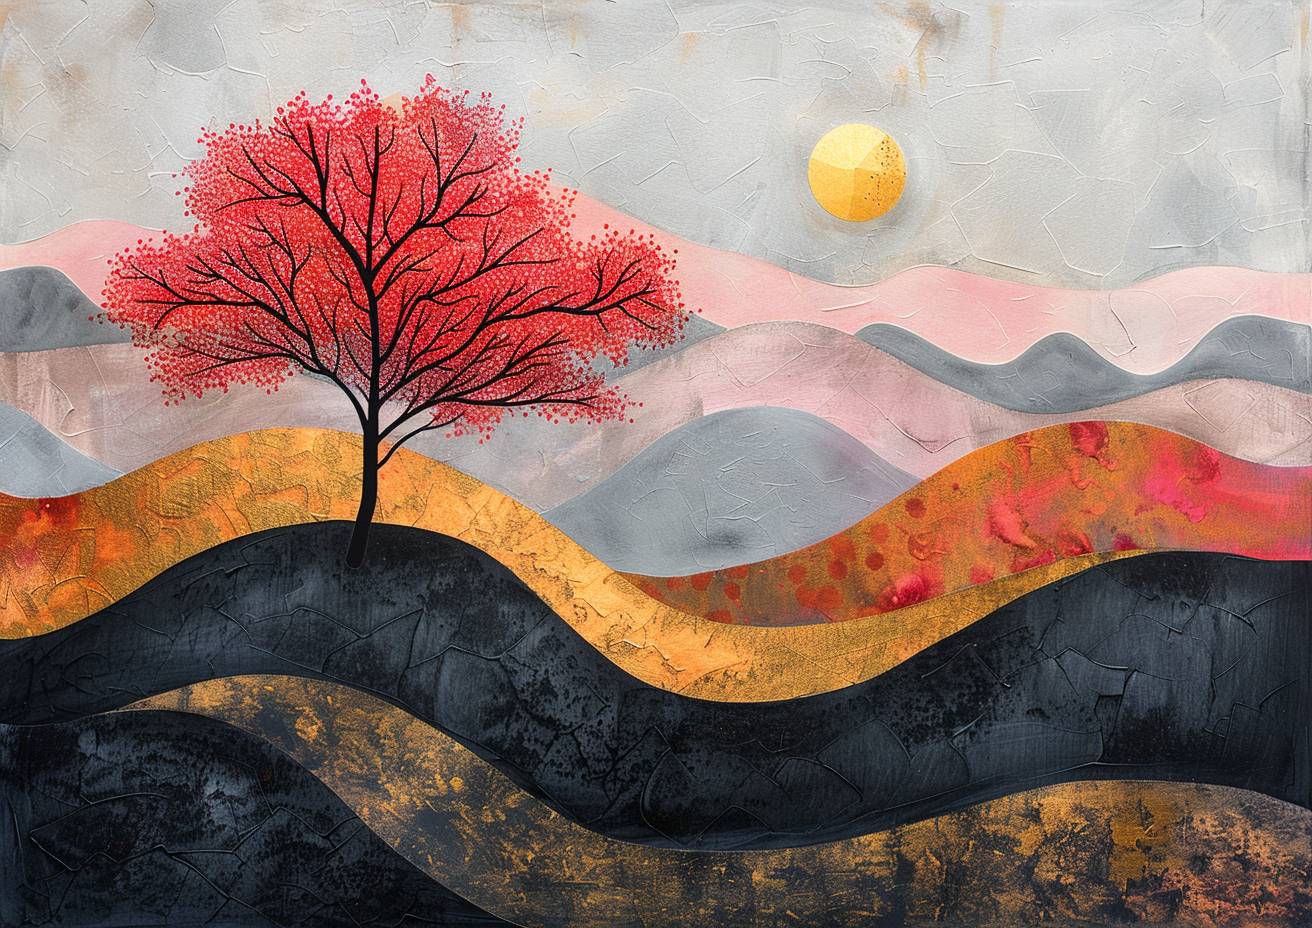 Minimalist abstract painting, a young wild cherry tree with colorful fruit, rolling hills, sunshine isolated in negative space, dry brushed with colorful chalk and charcoal, black marker outlines, gold foil accents, muted palette